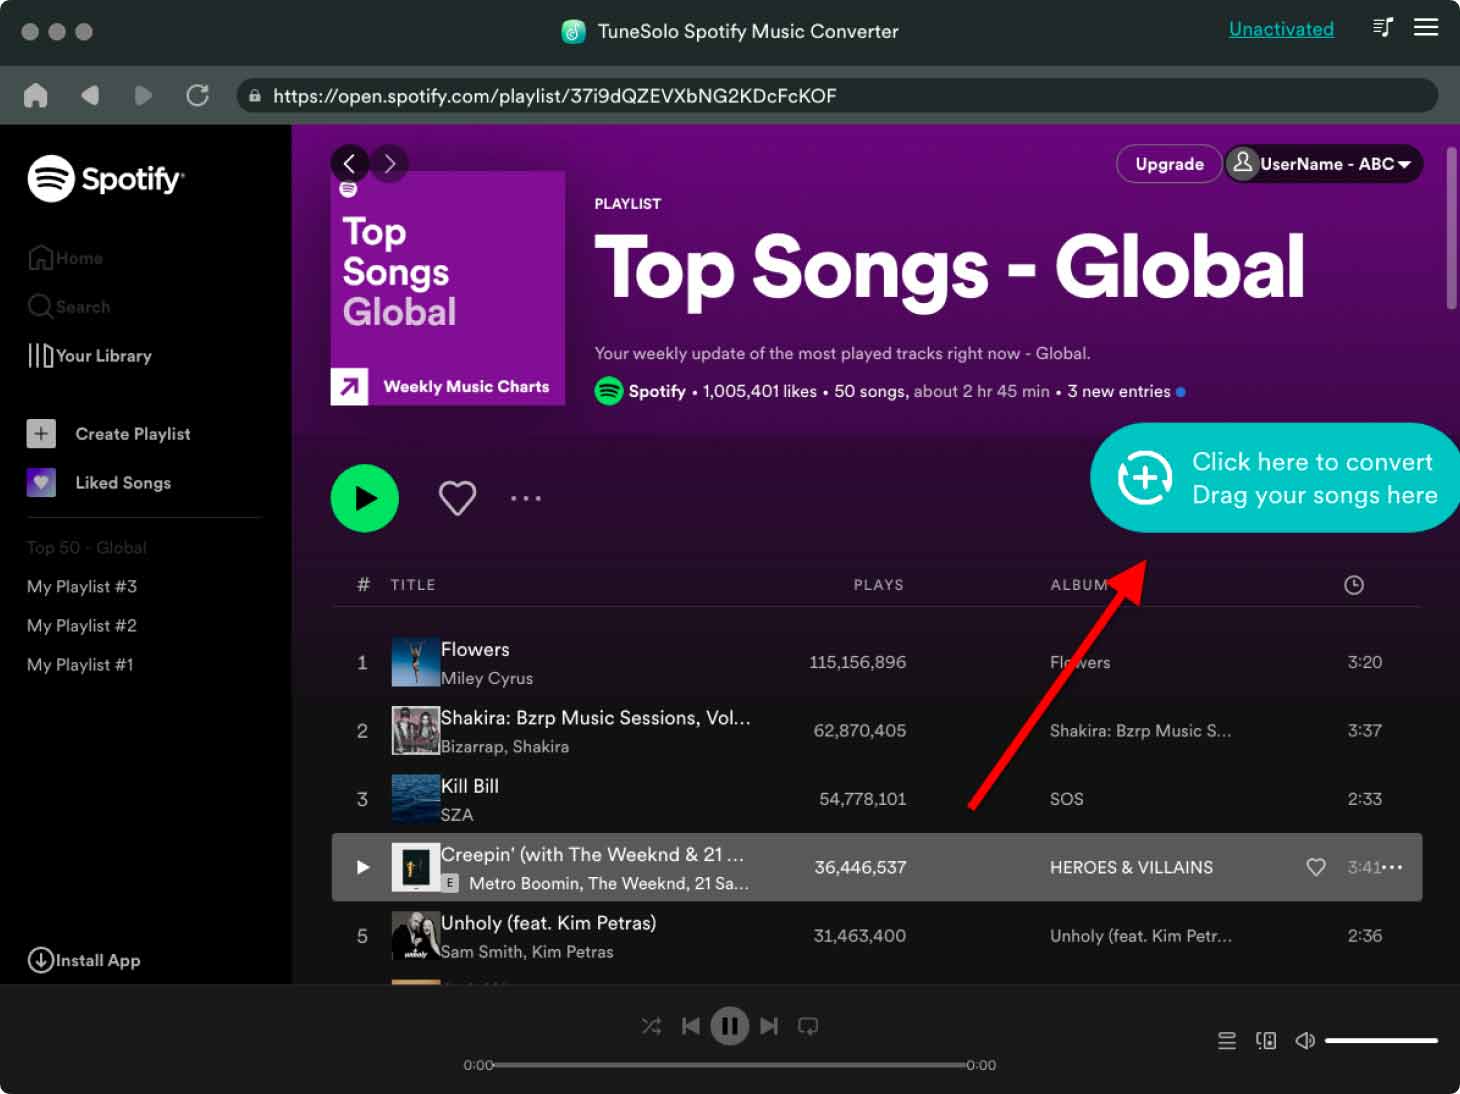 Add Spotify Music to the Converting List